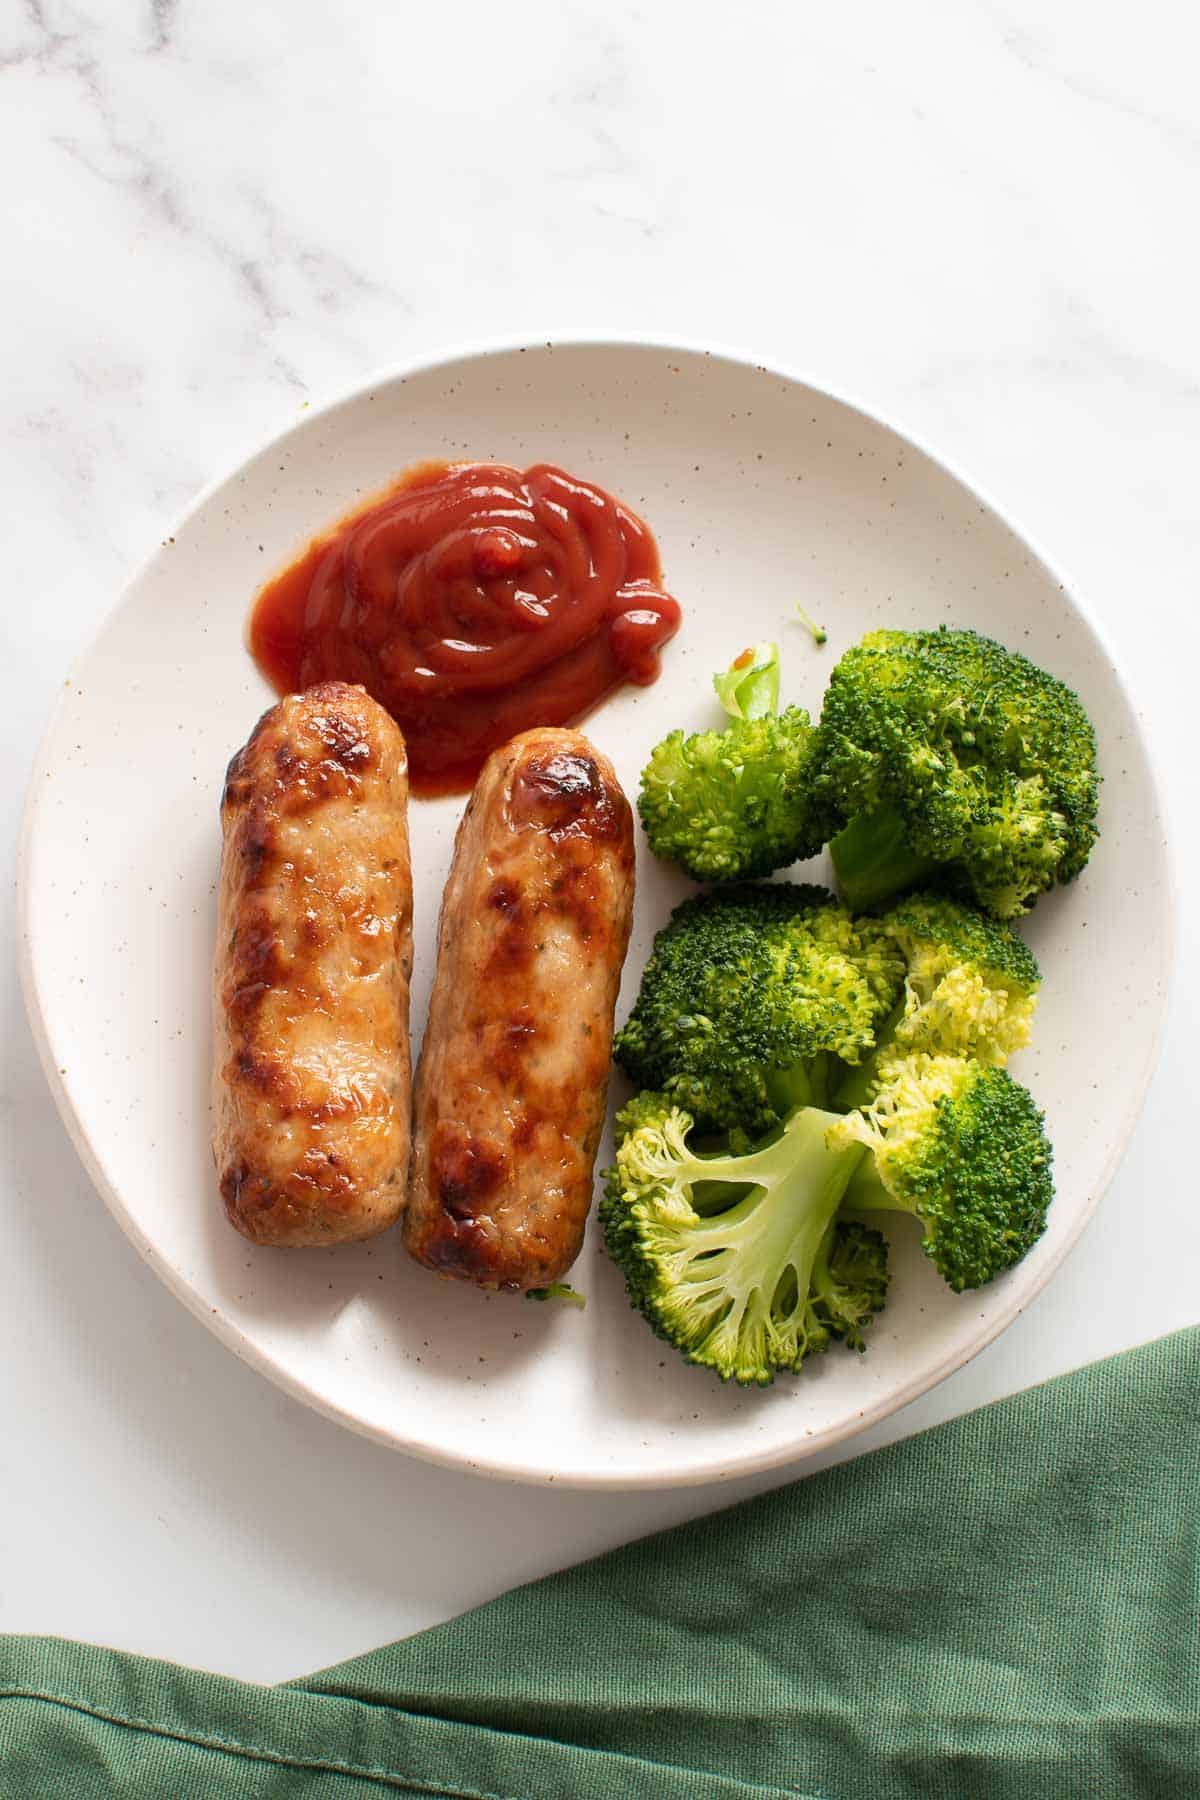 Cooked sausages on a plate with ketchup and broccoli.